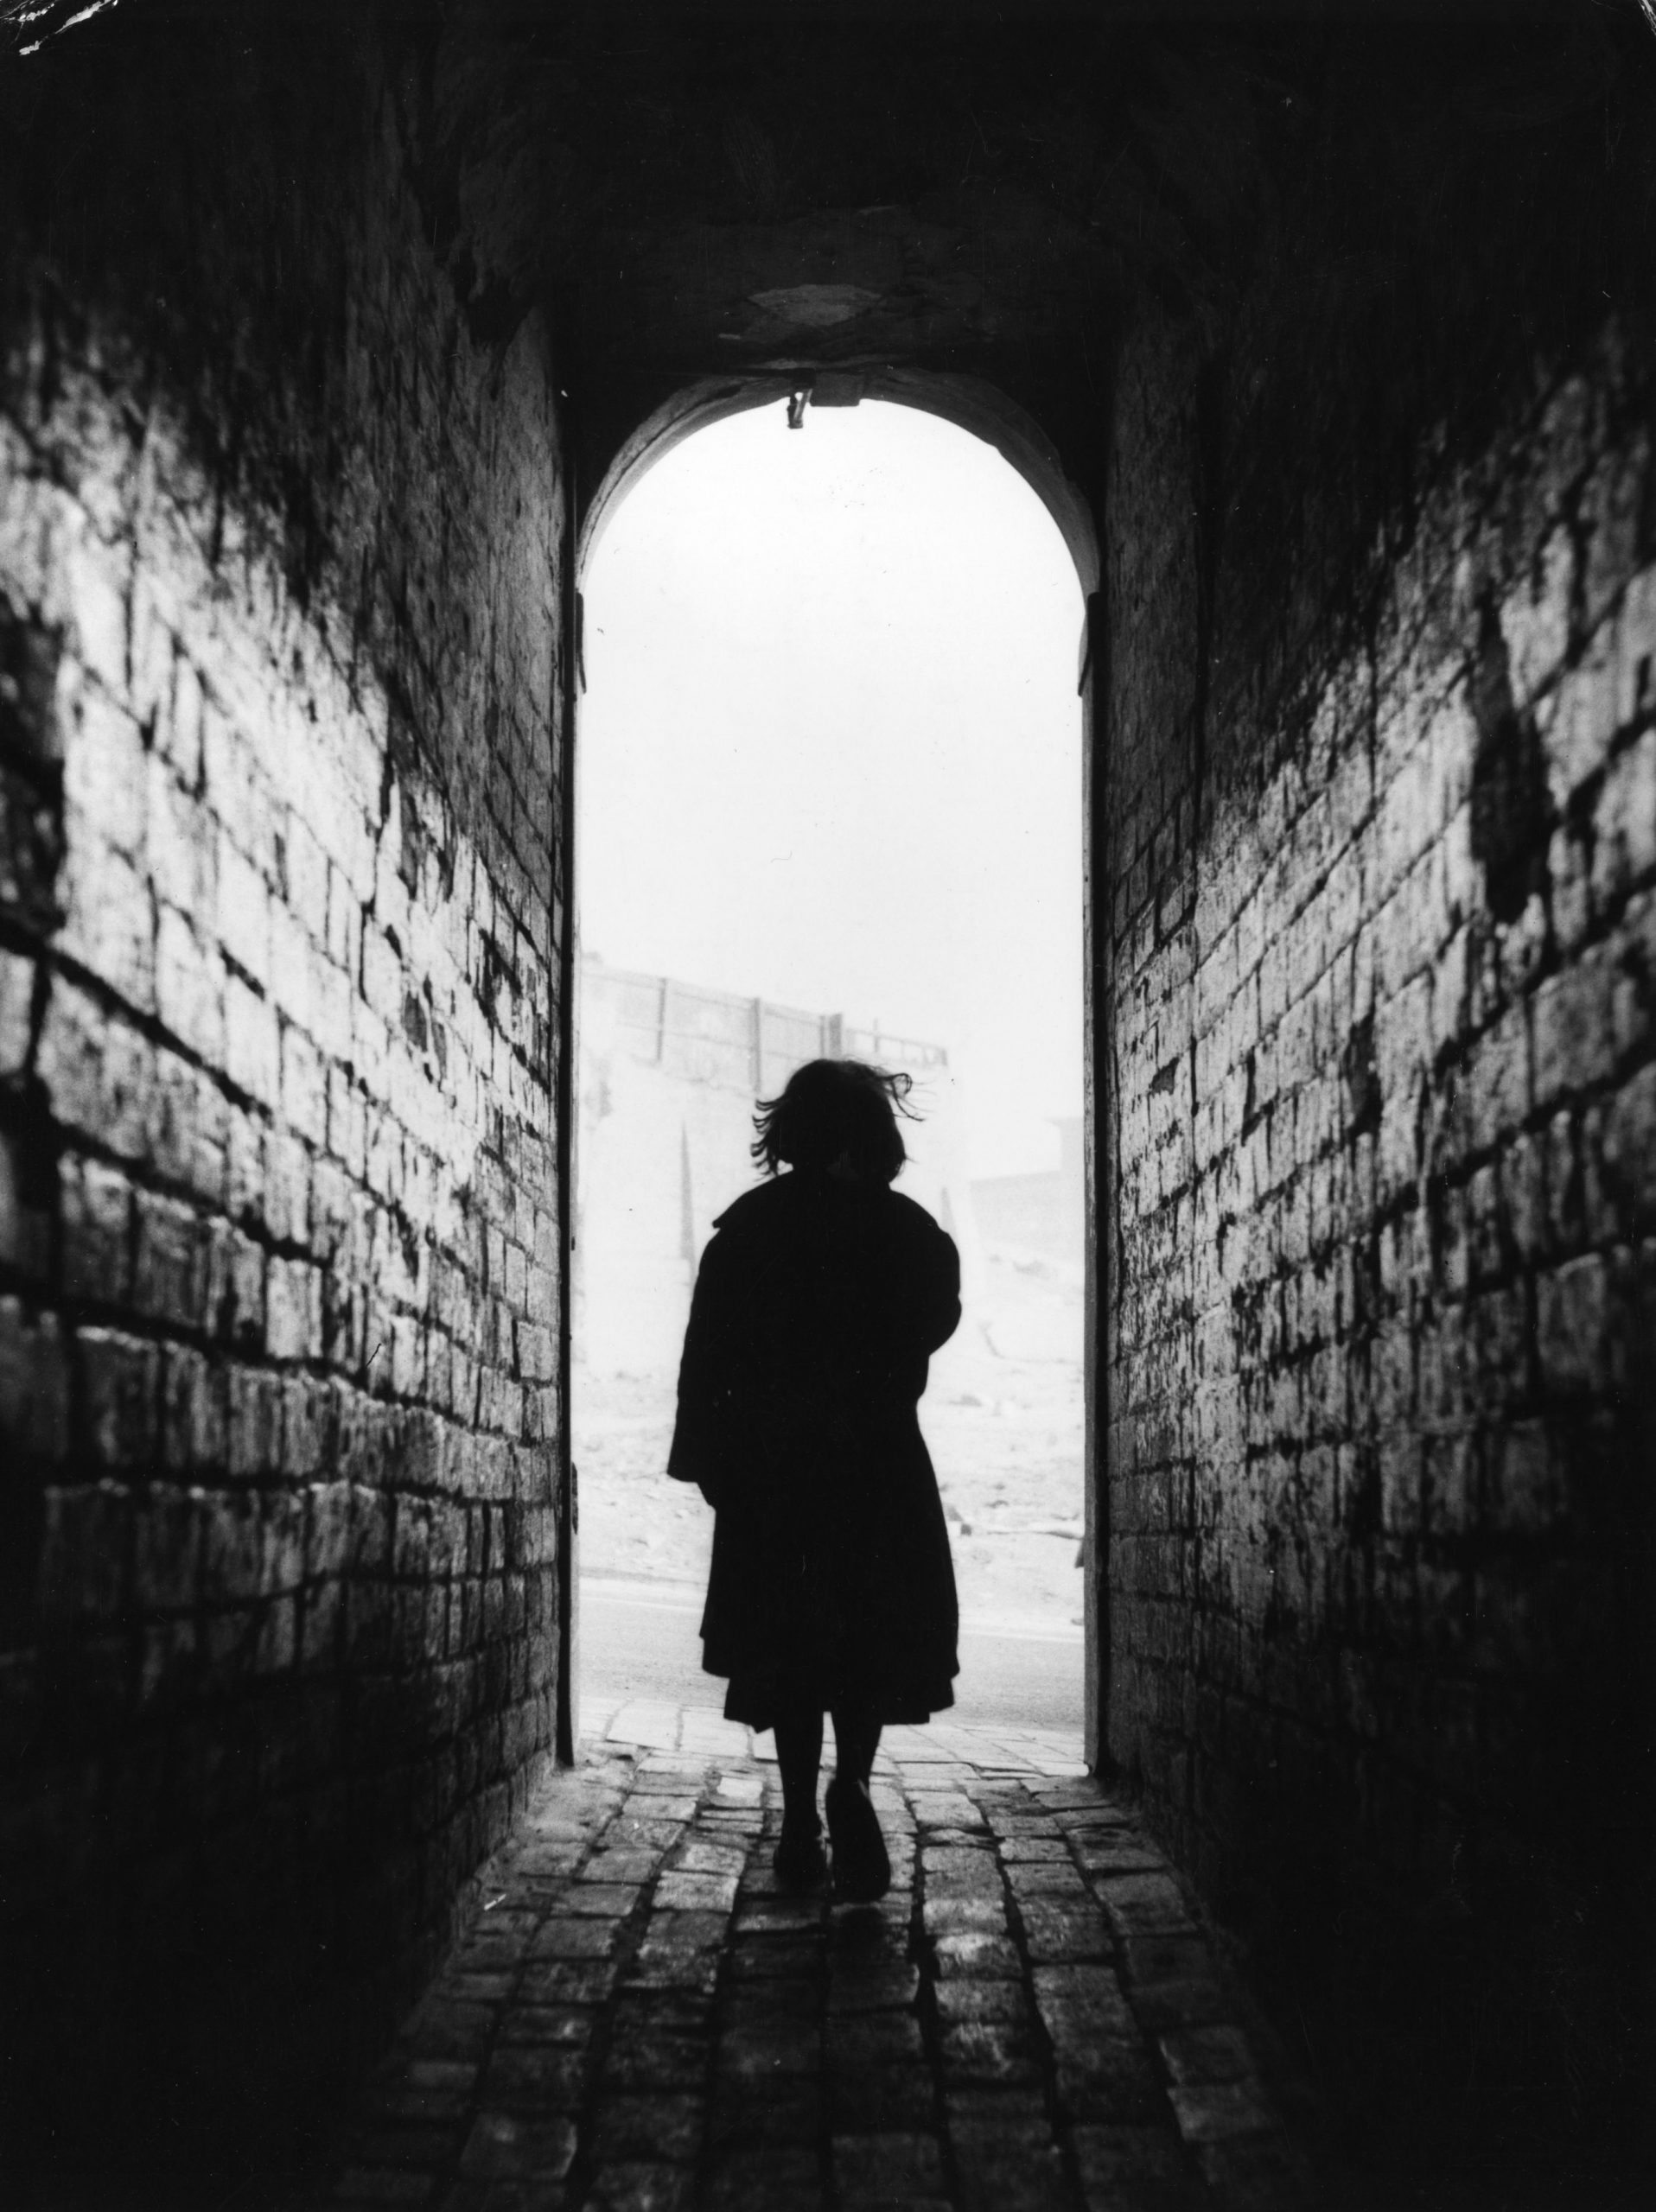 A silhouetted figure in a dark passage